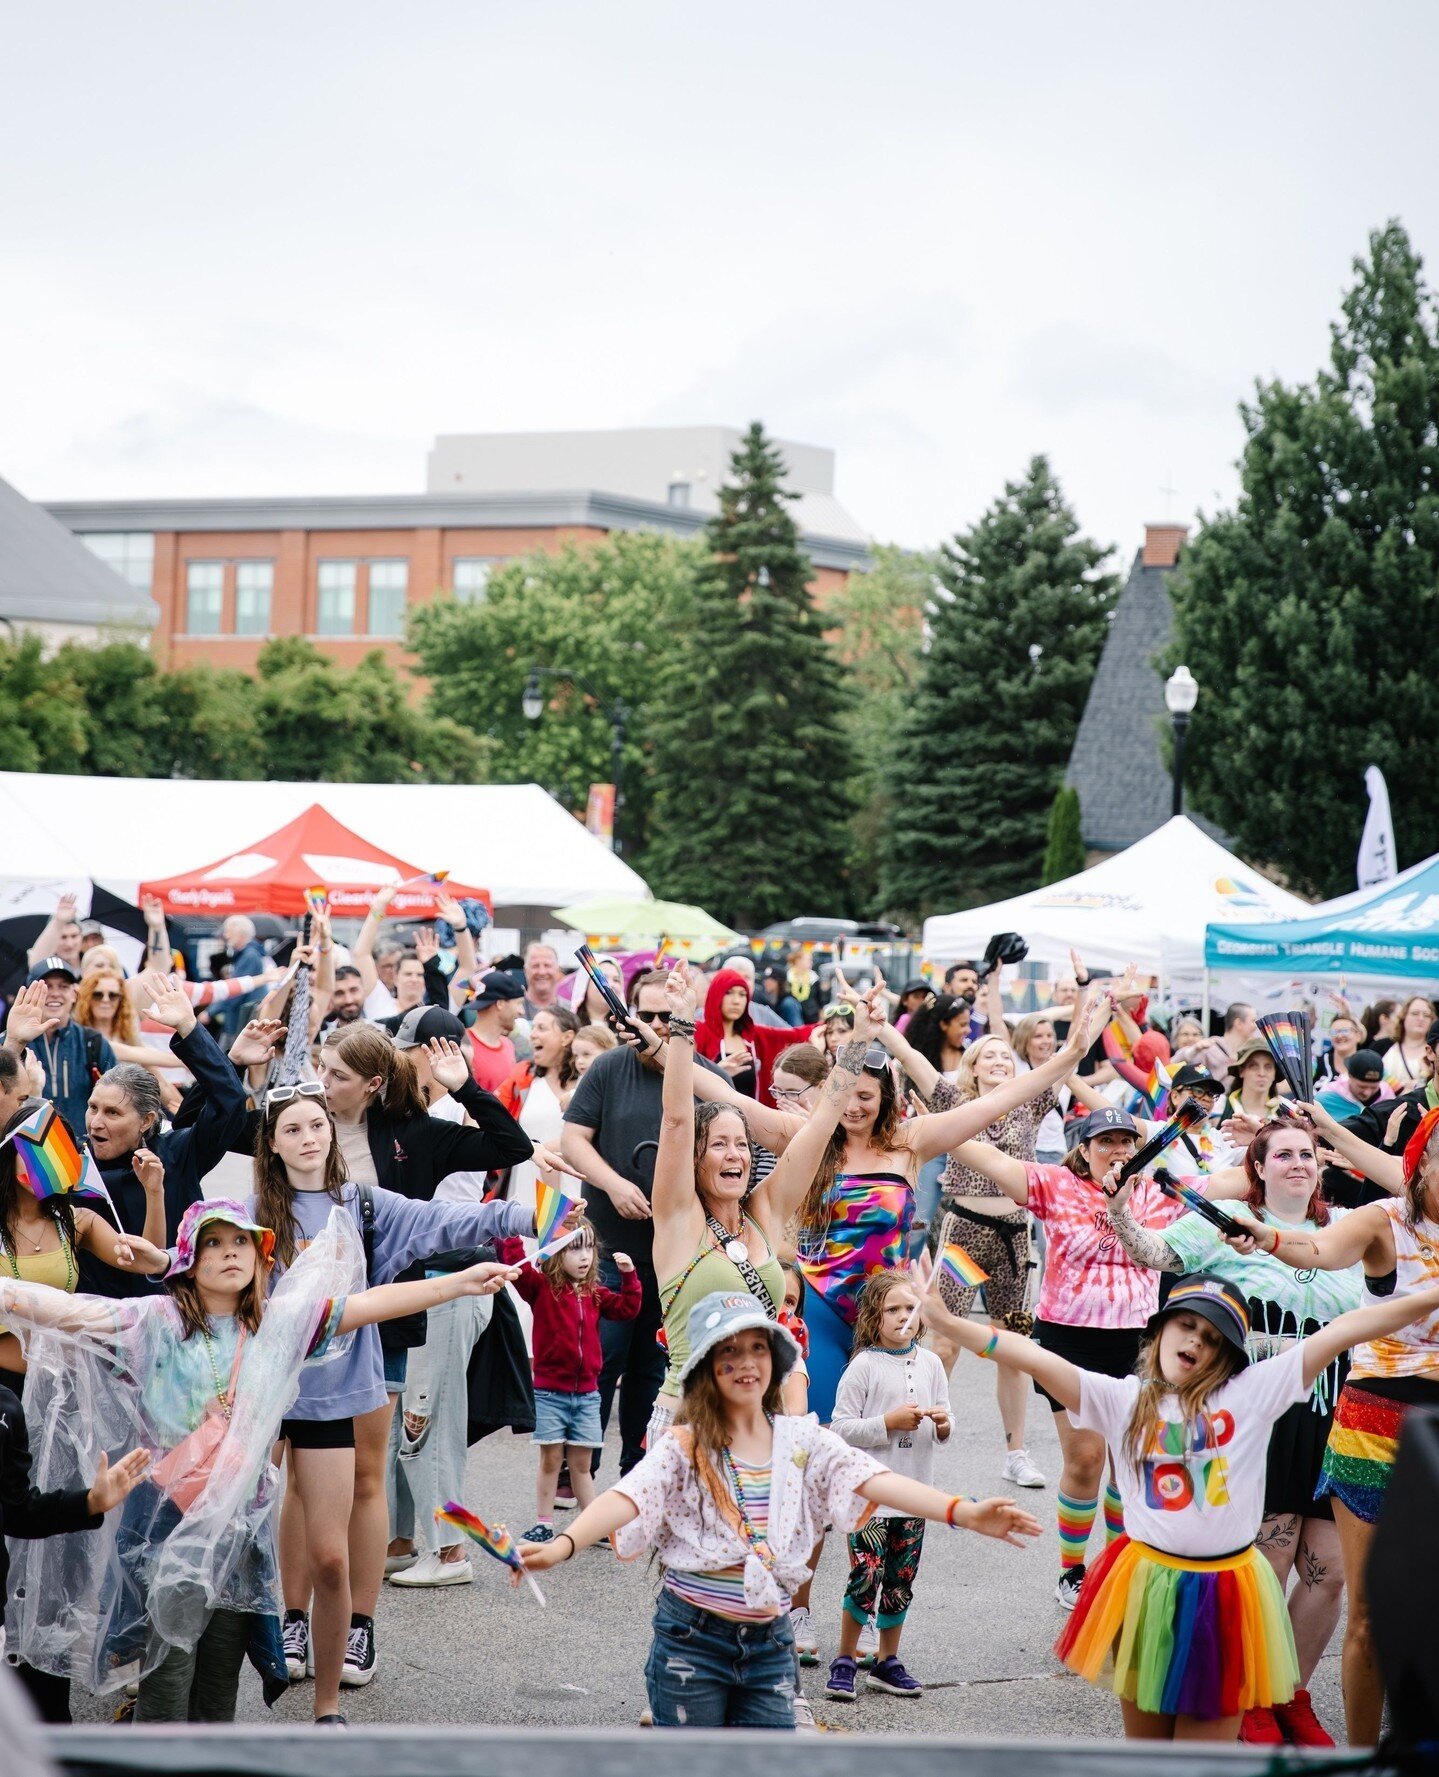 ⁠
🌈 The Collingwood Pride Festival will be a weekend of outdoor events, community activations, and family entertainment taking place in Collingwood's Historical Downtown Core and throughout South Georgian Bay. ⁠
⁠
The Events Schedule includes:⁠
⁠
💥